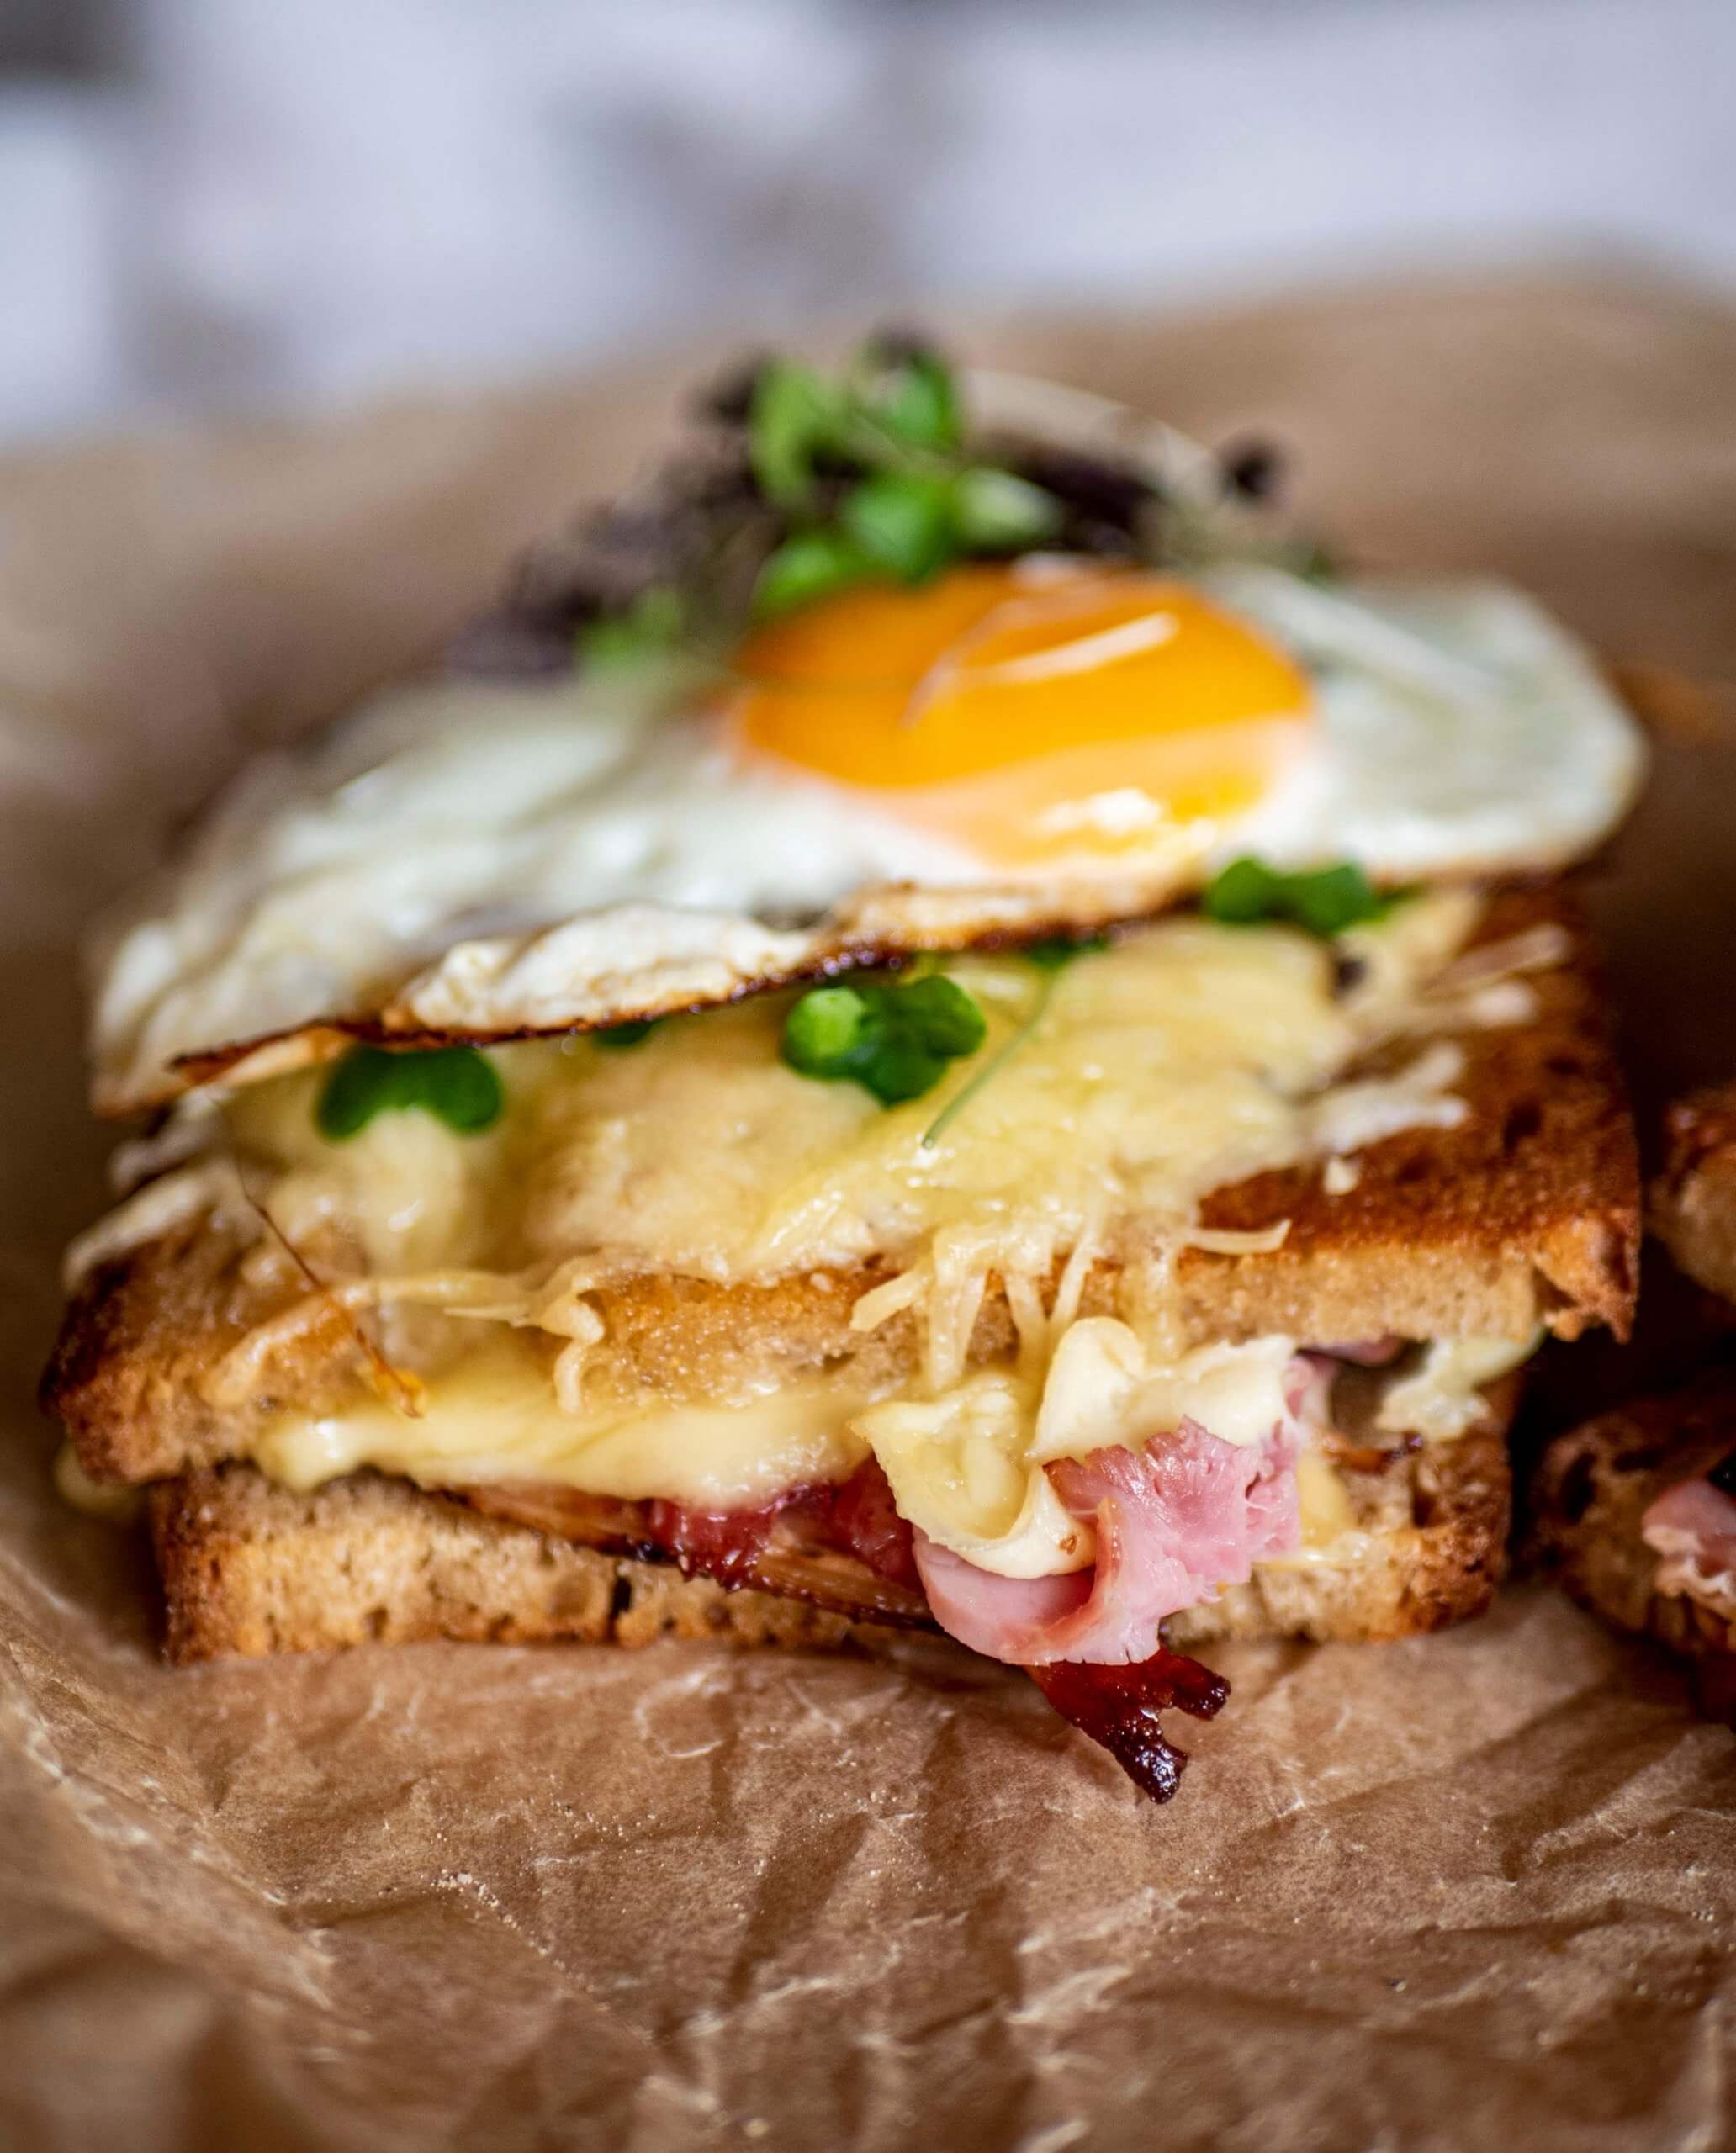 Croque Monsieur vs. Croque Madame: What's the Difference?